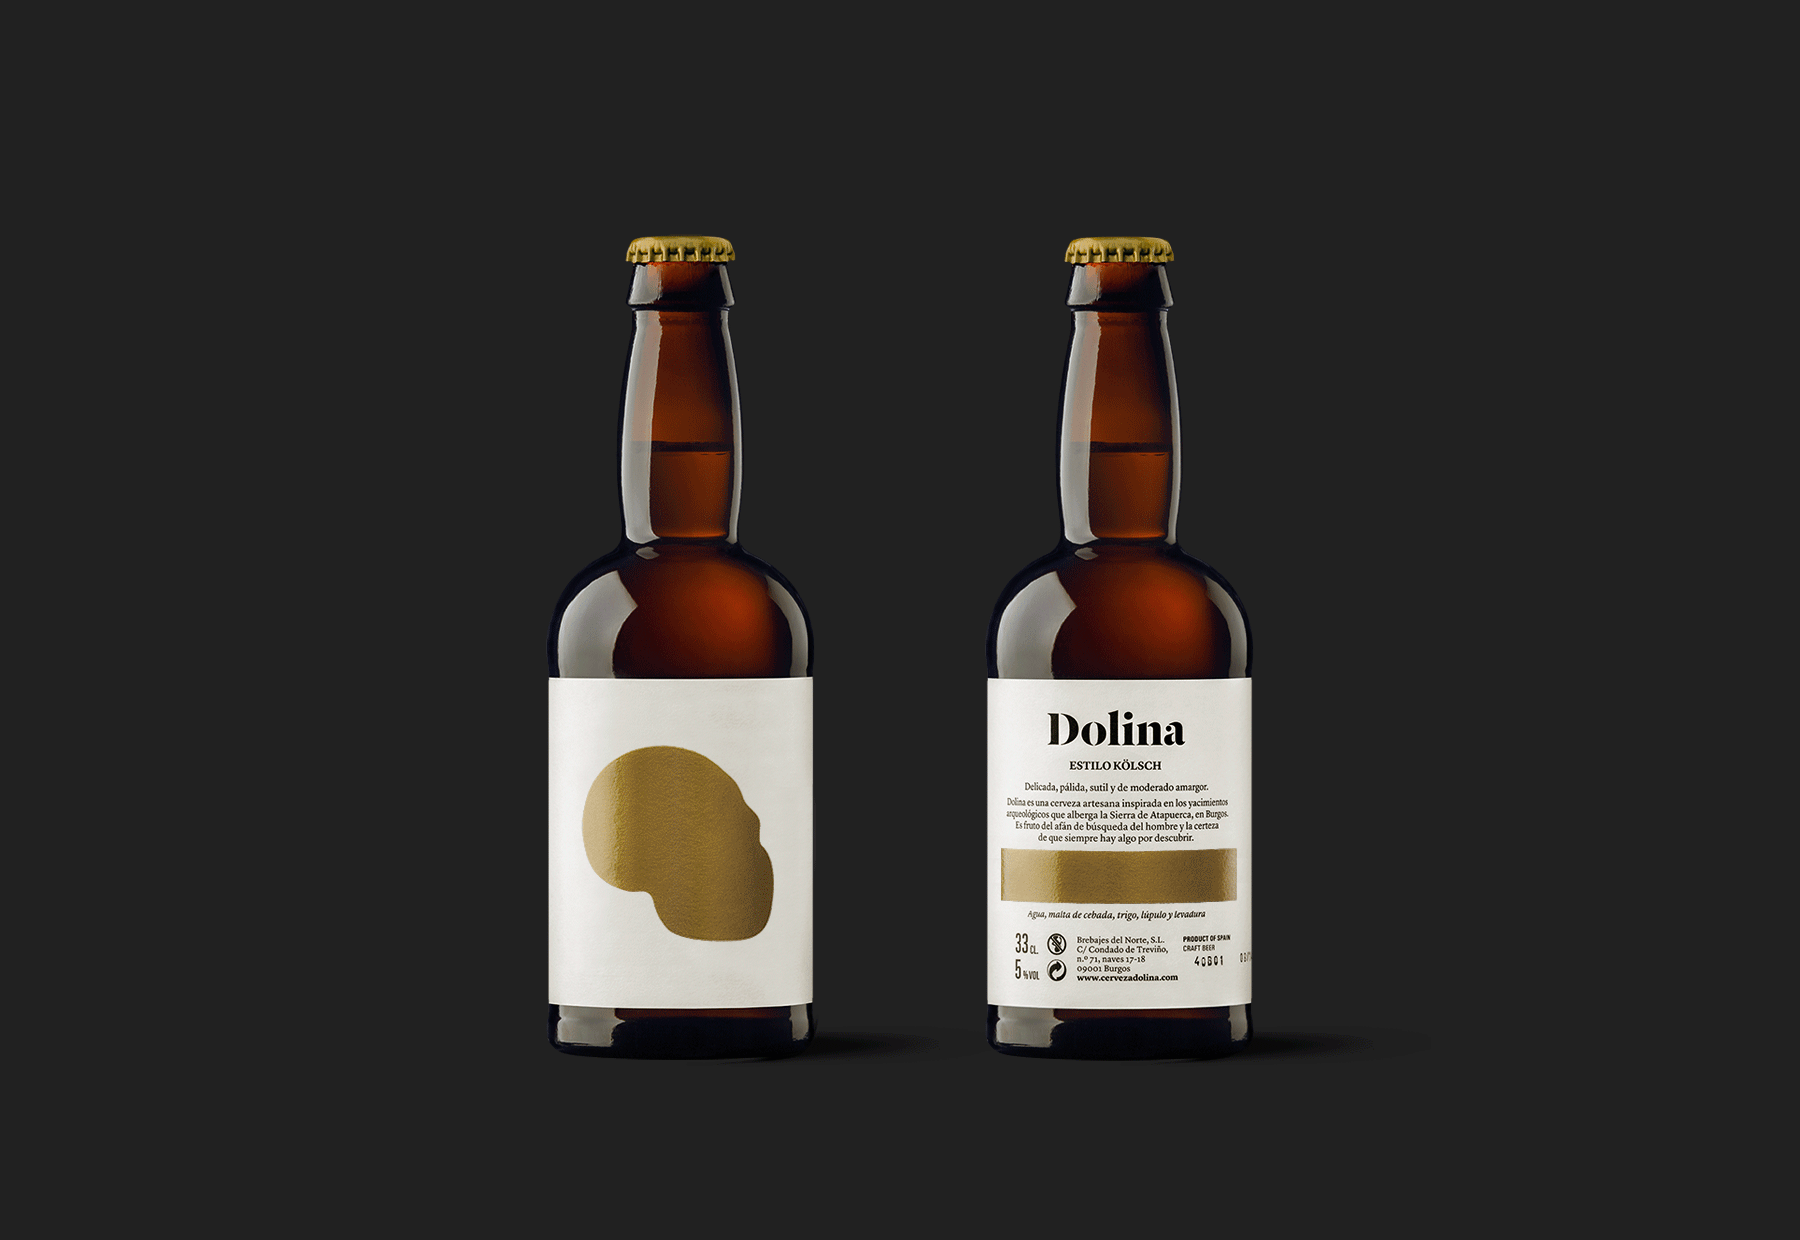 Spanish Craft Beer Brand Creation and Packaging Design